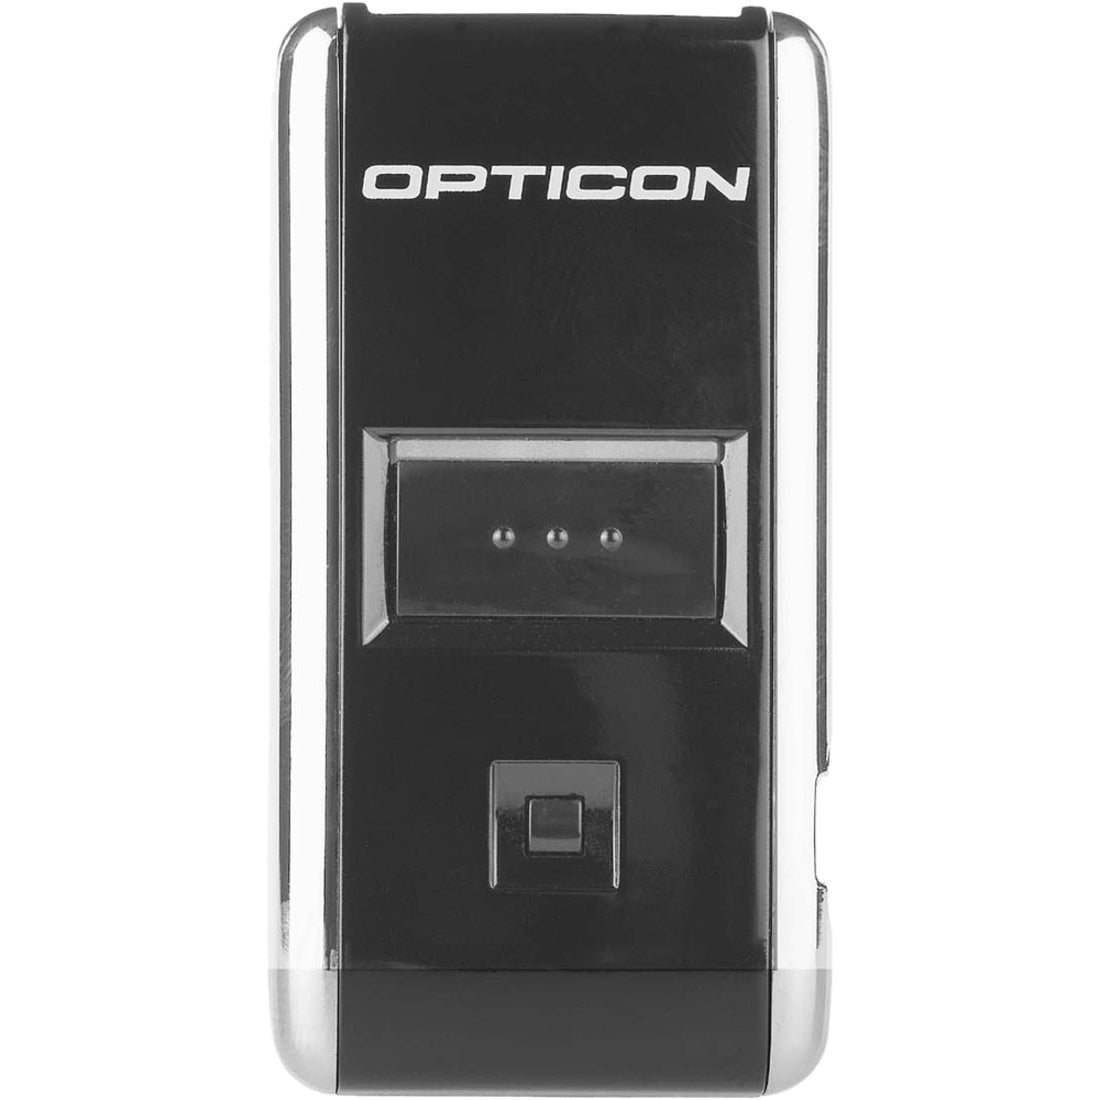 Opticon OPN200100 OPN2001 Handheld Bar Code Reader, USB Cable Included, 100 scan/s, Laser, 1D Barcode Scanner